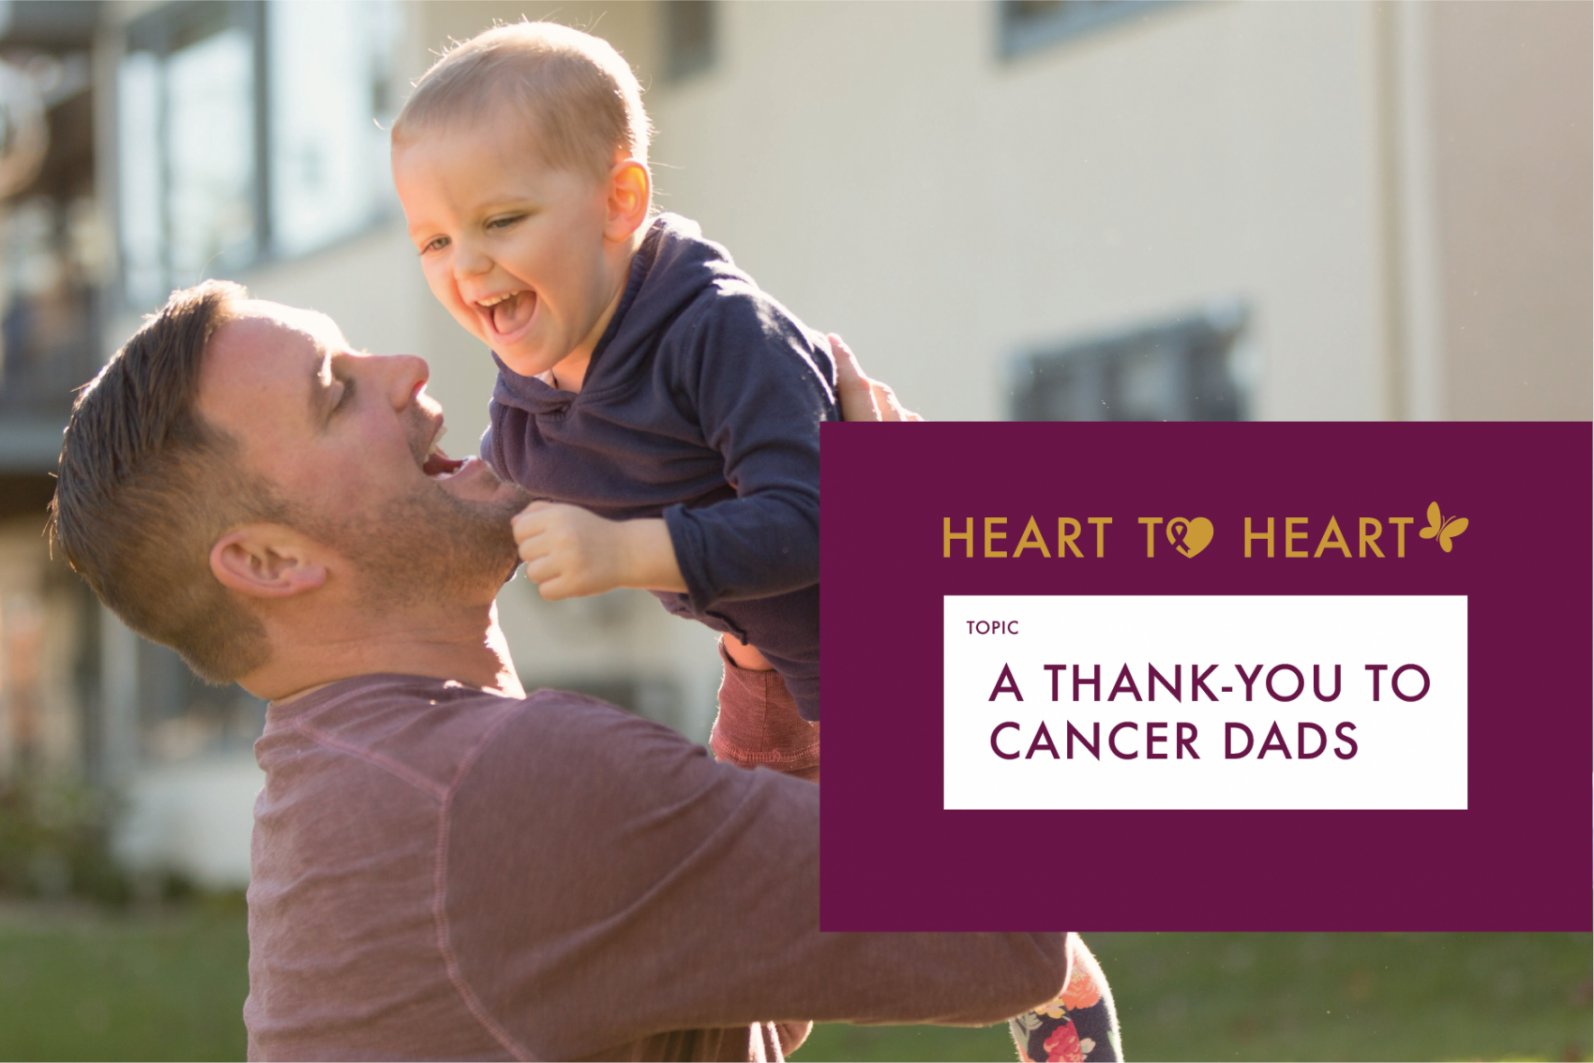 Featured image for “A Thank-You to Cancer Dads”